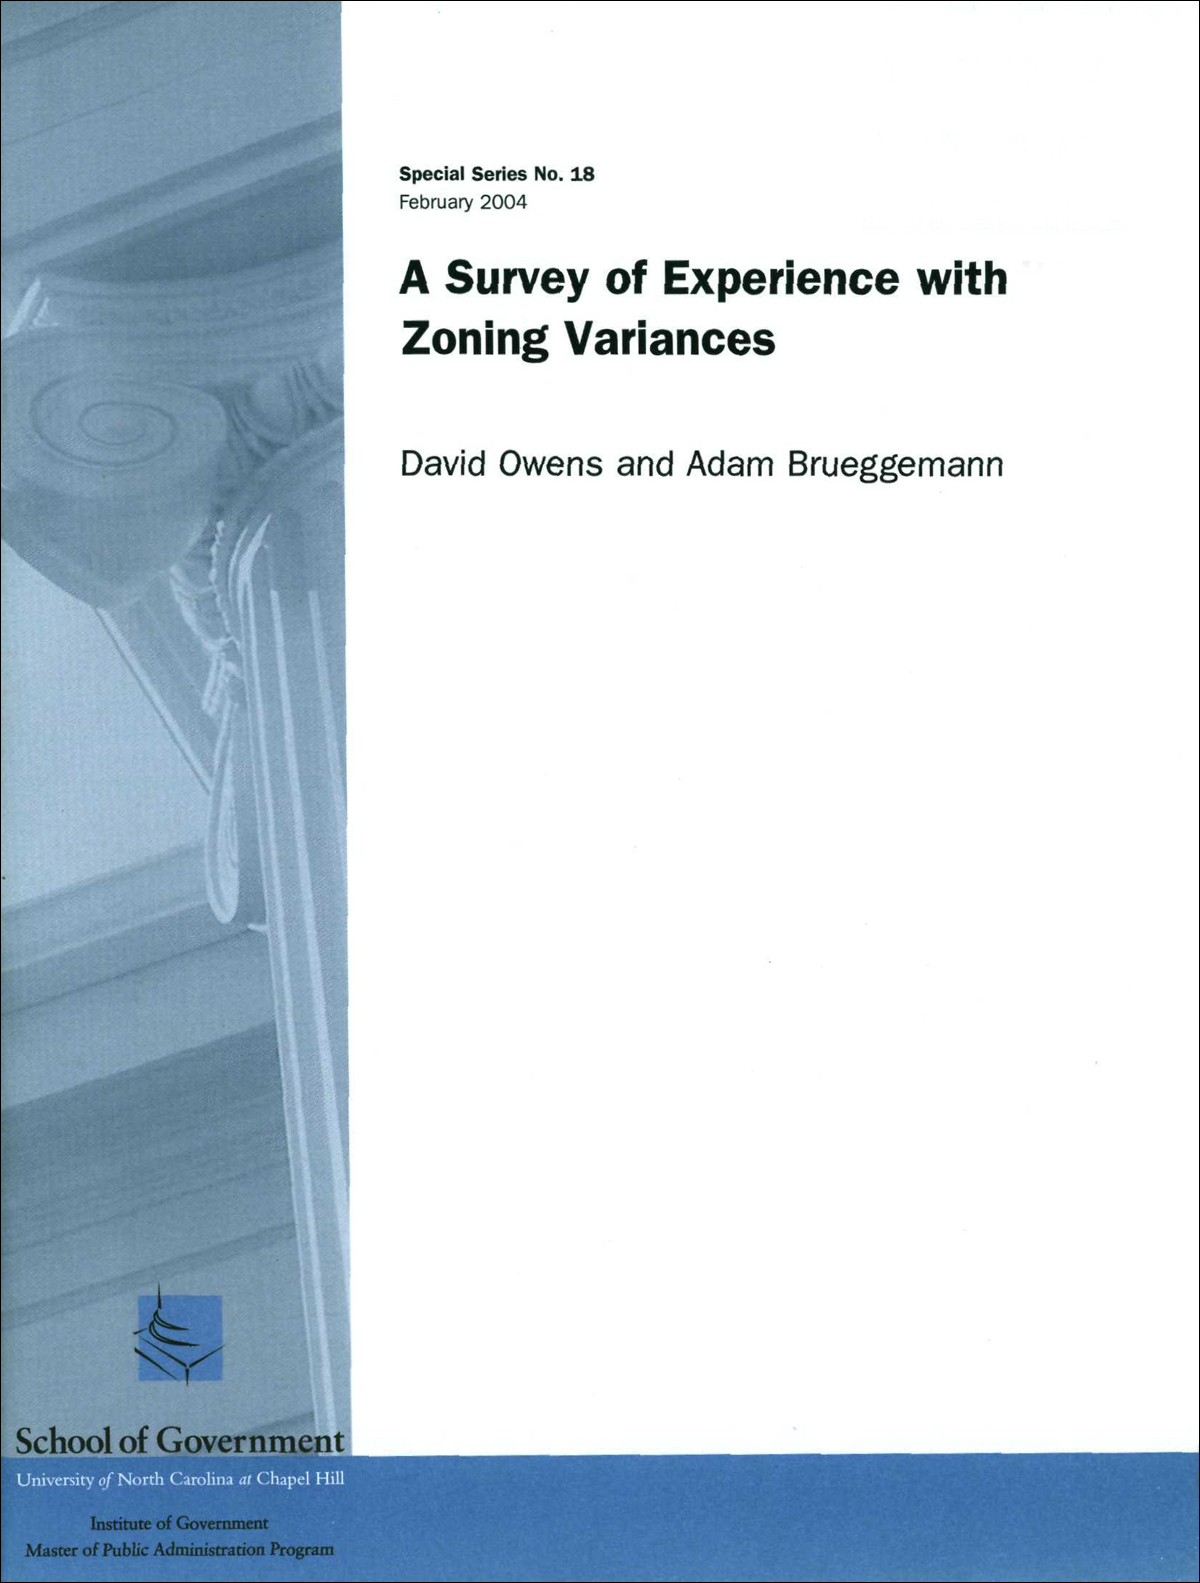 A Survey of Experience with Zoning Variances, by David W. Owens and Adam Brueggemann, Special Series No. 18, February 2004